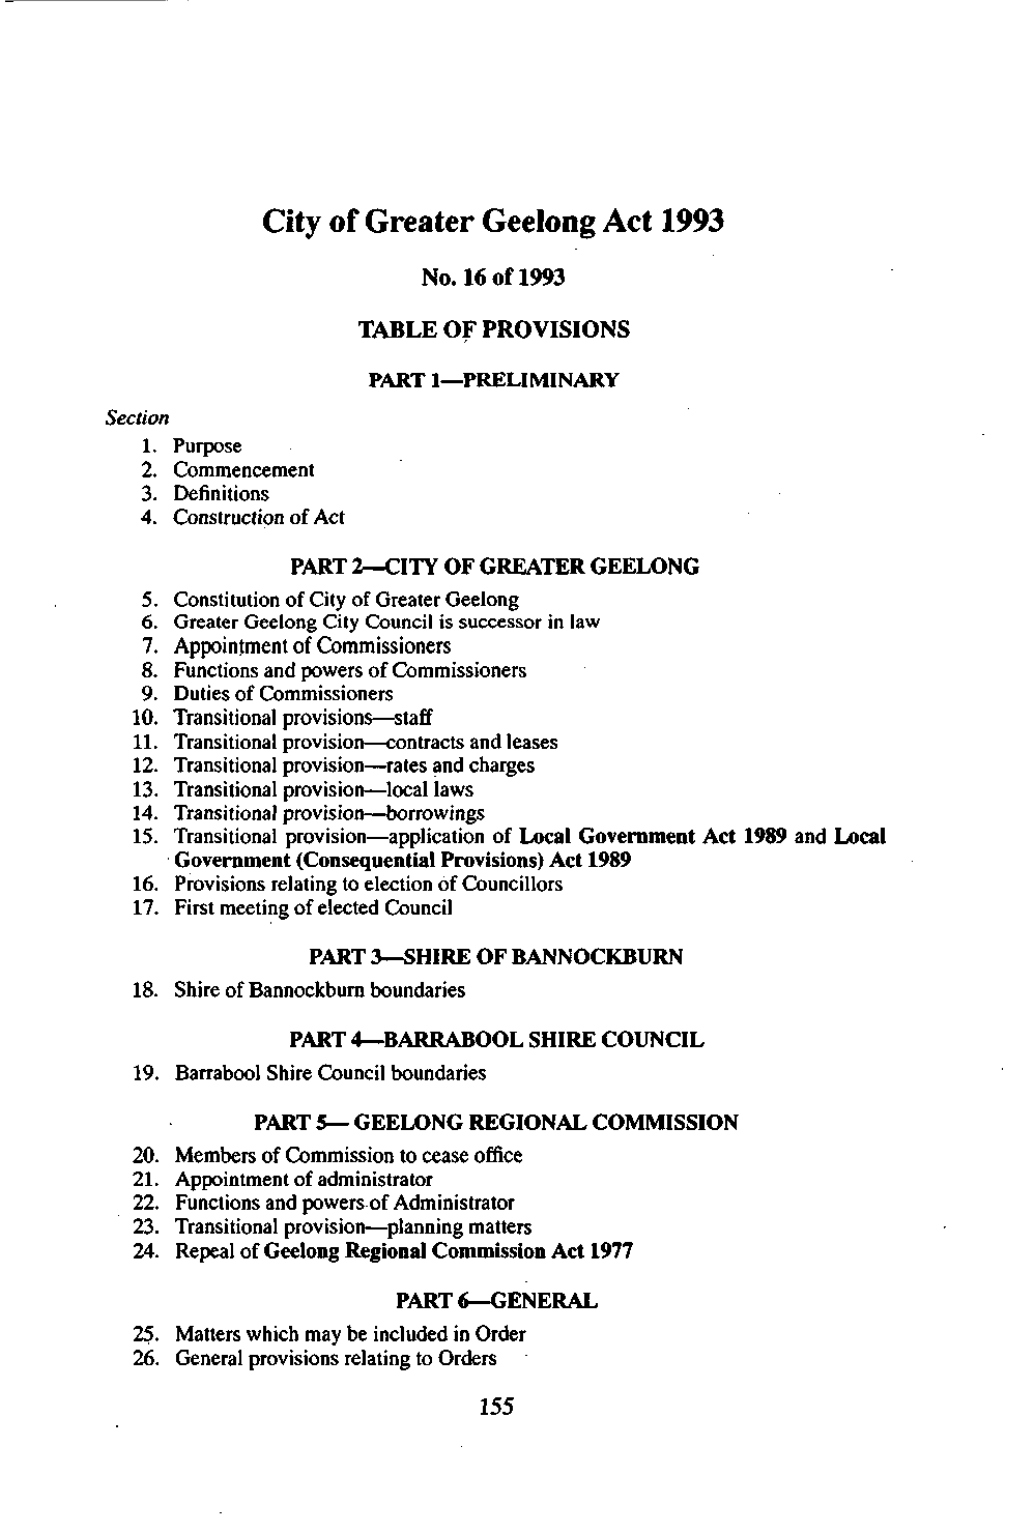 City of Greater Geelong Act 1993